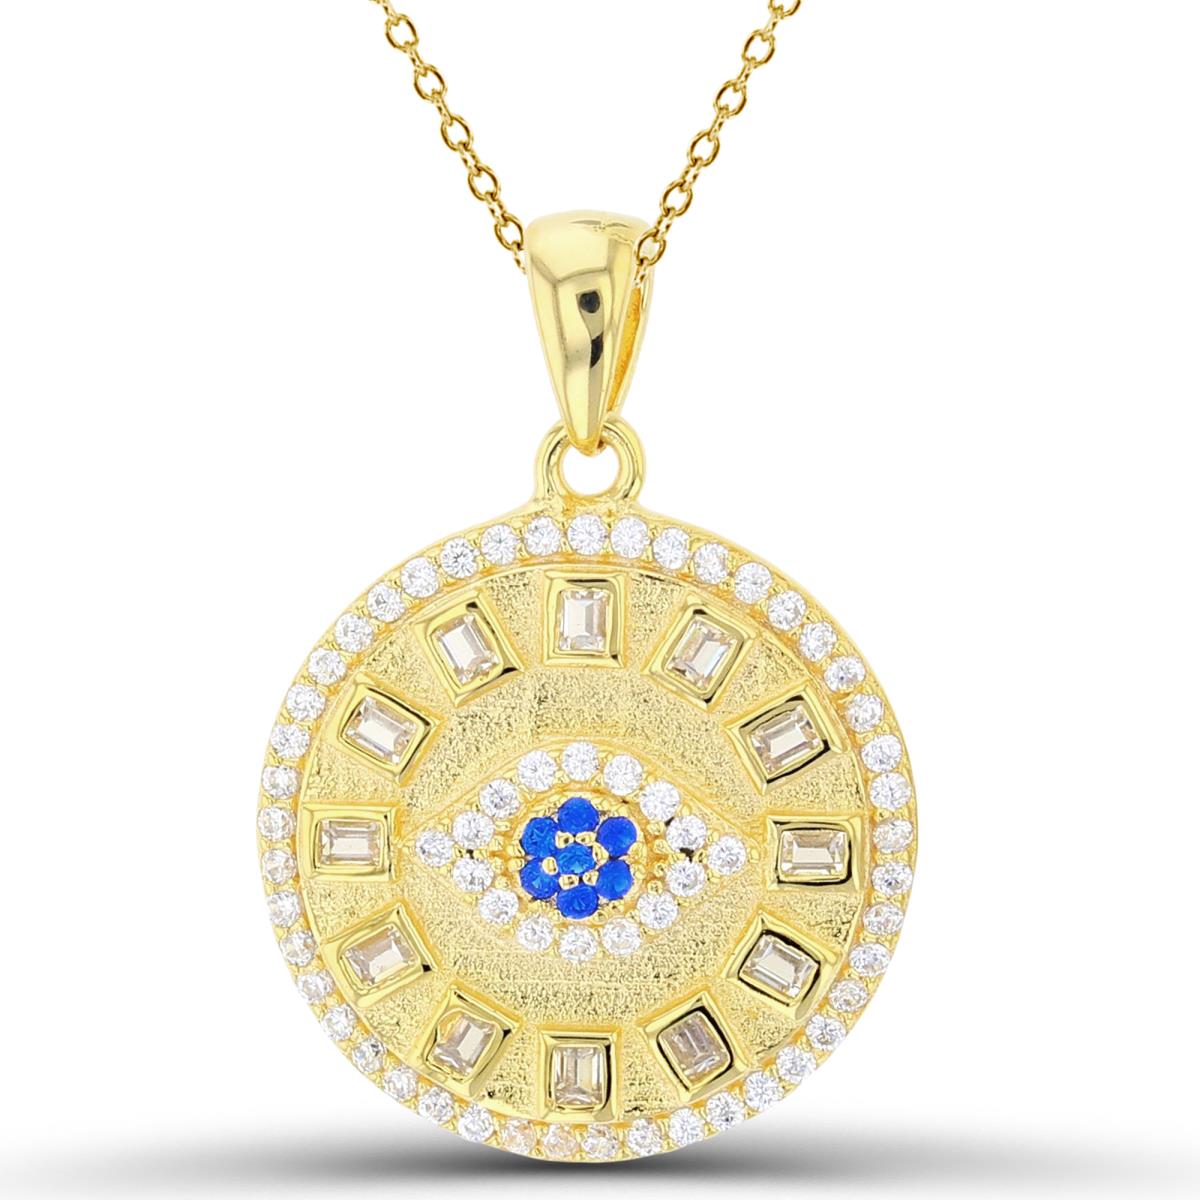 Sterling Silver+1Micron Yellow Gold Rnd #113 BLue Spinel & SB/Rnd White CZ Evil Eye in Polish/Satin Circle 18"Necklace